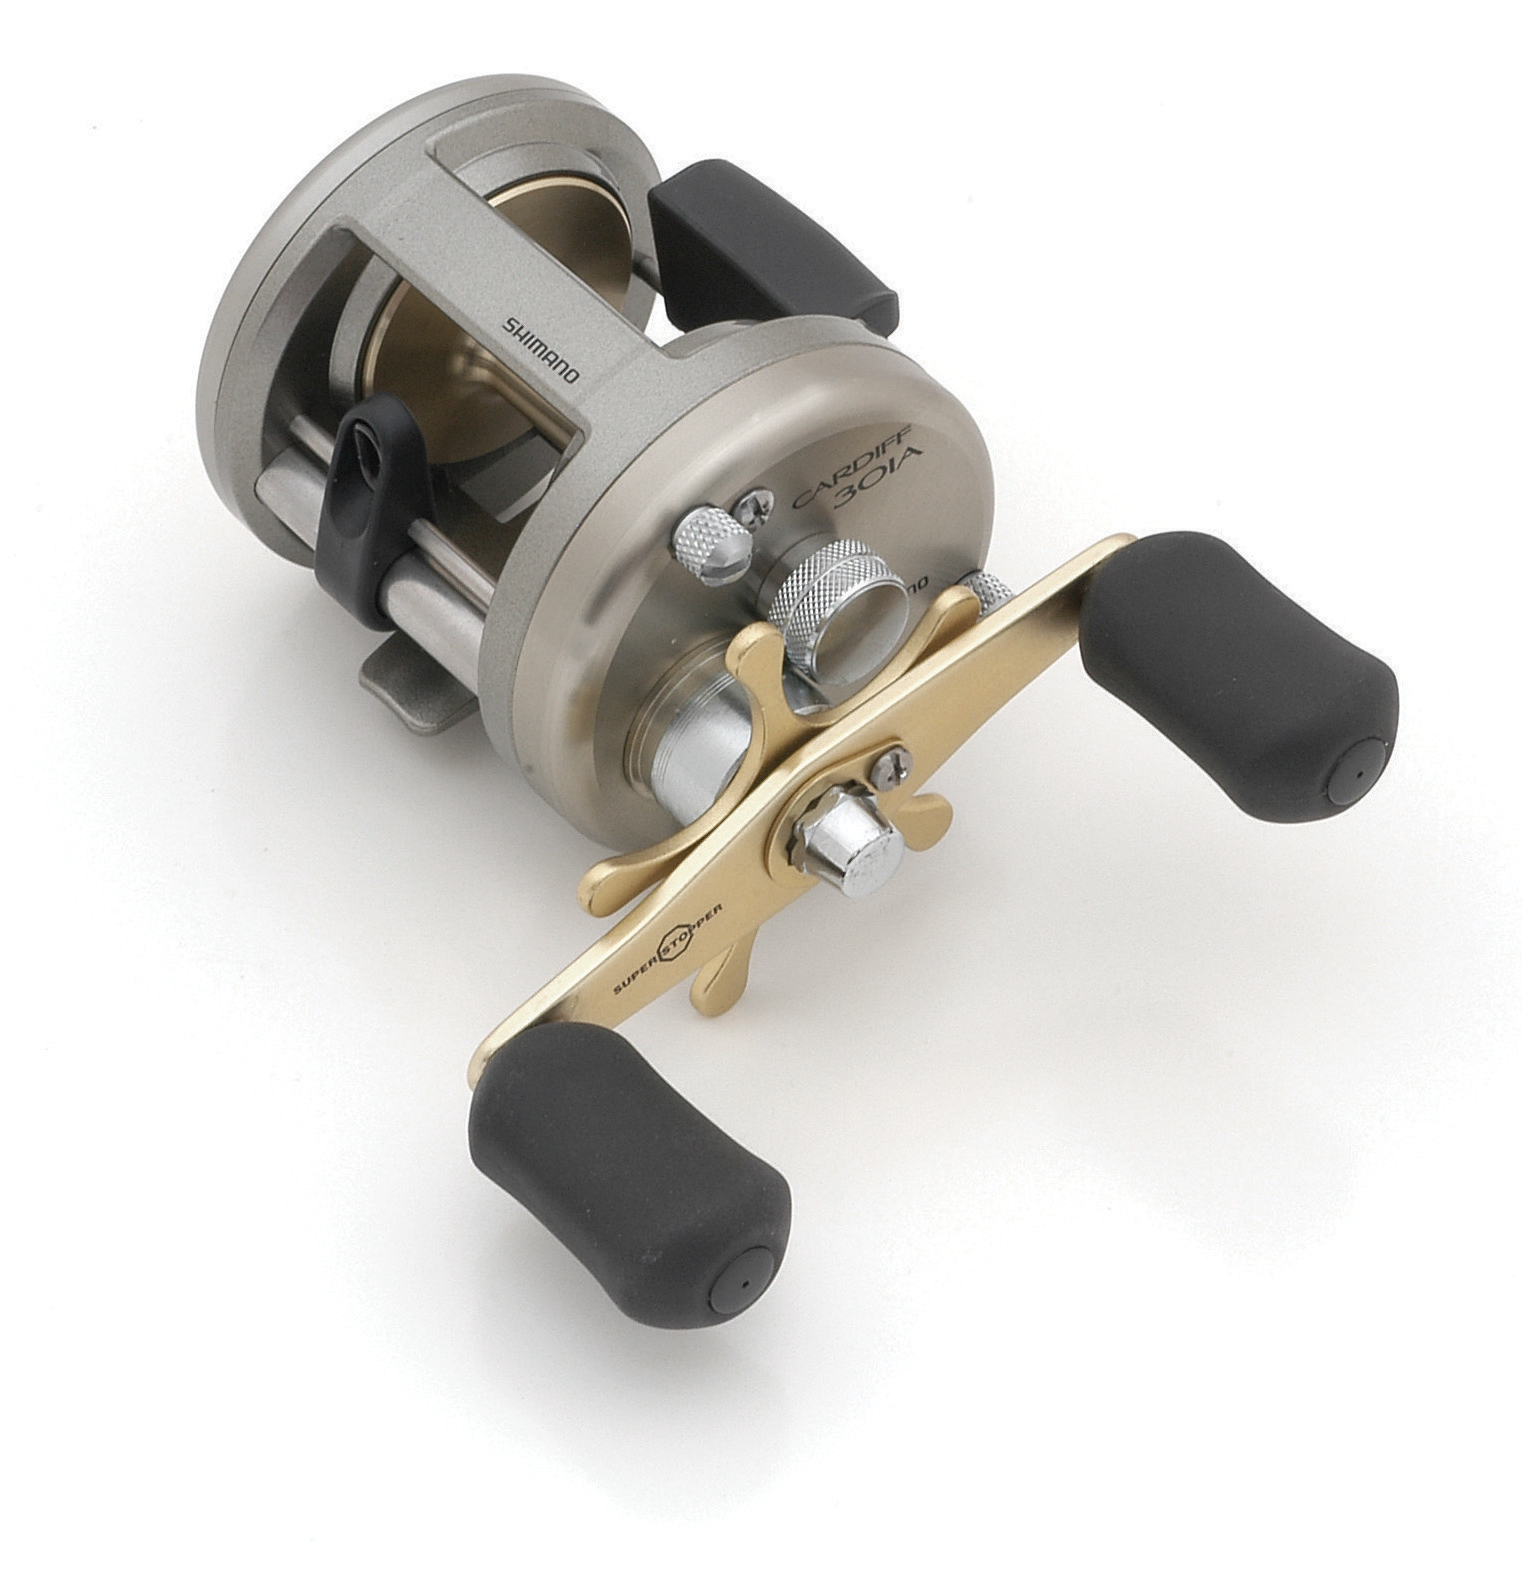 Cardiff A Series Casting Reels